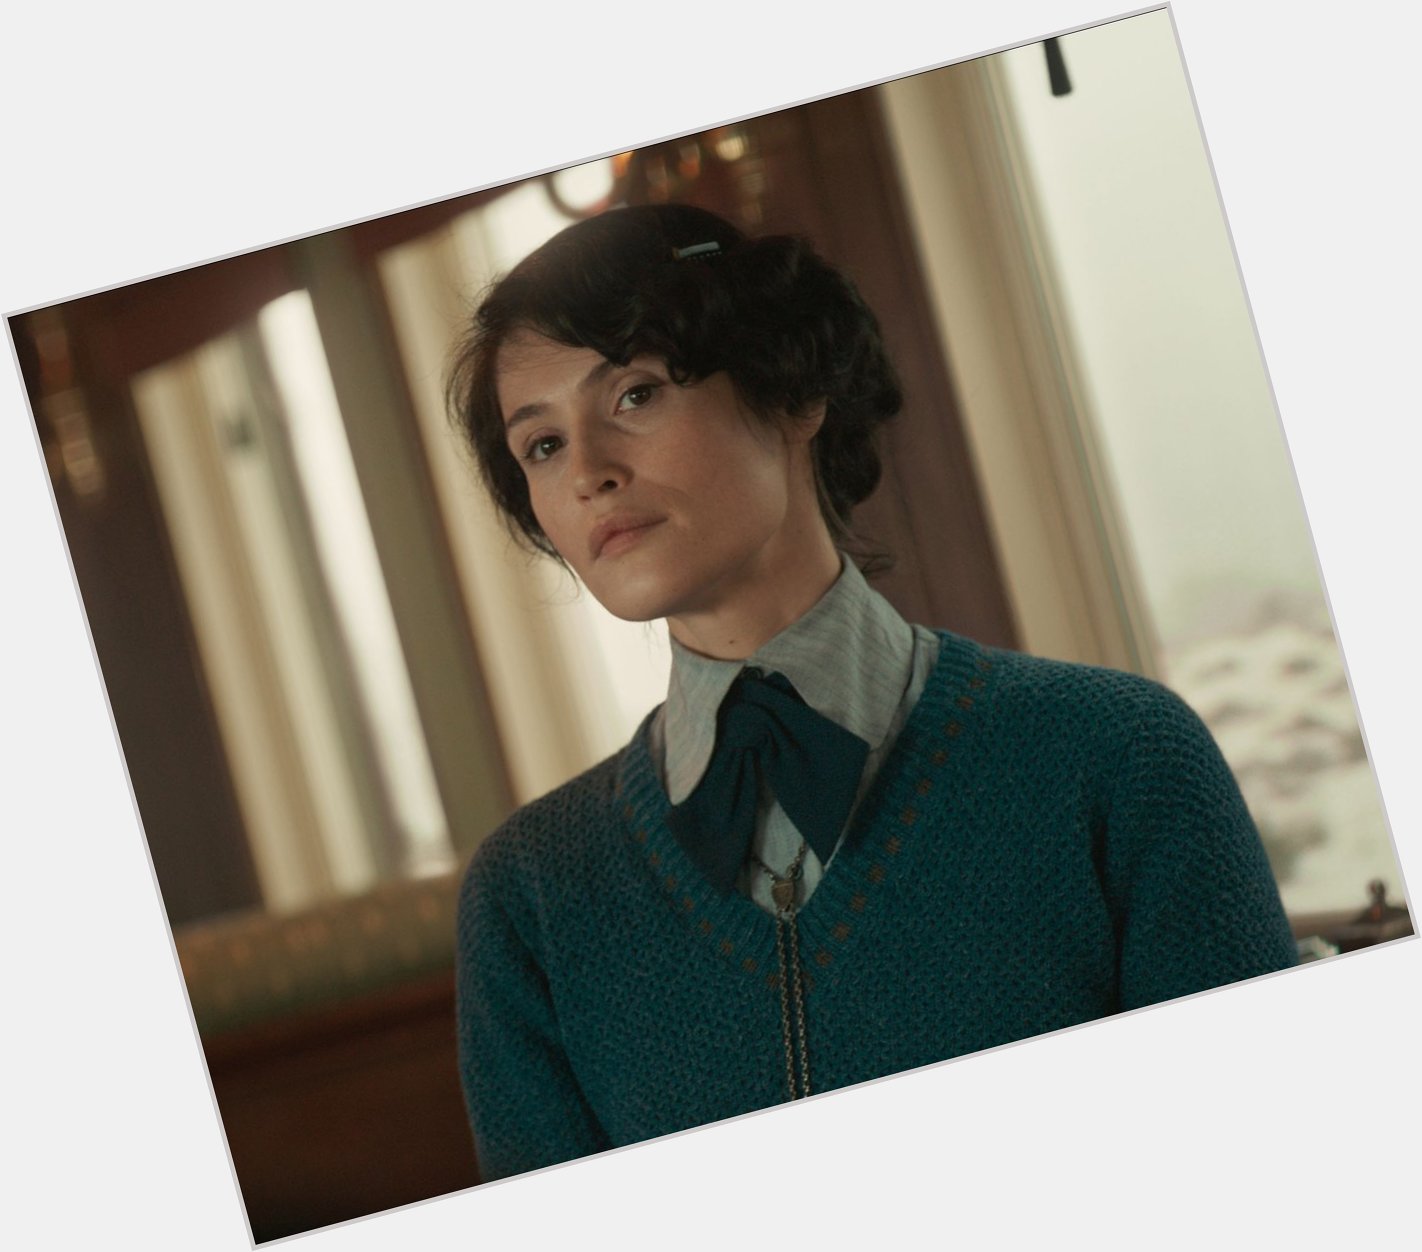 Did you forget your manners? Wish a happy birthday to Gemma Arterton! 